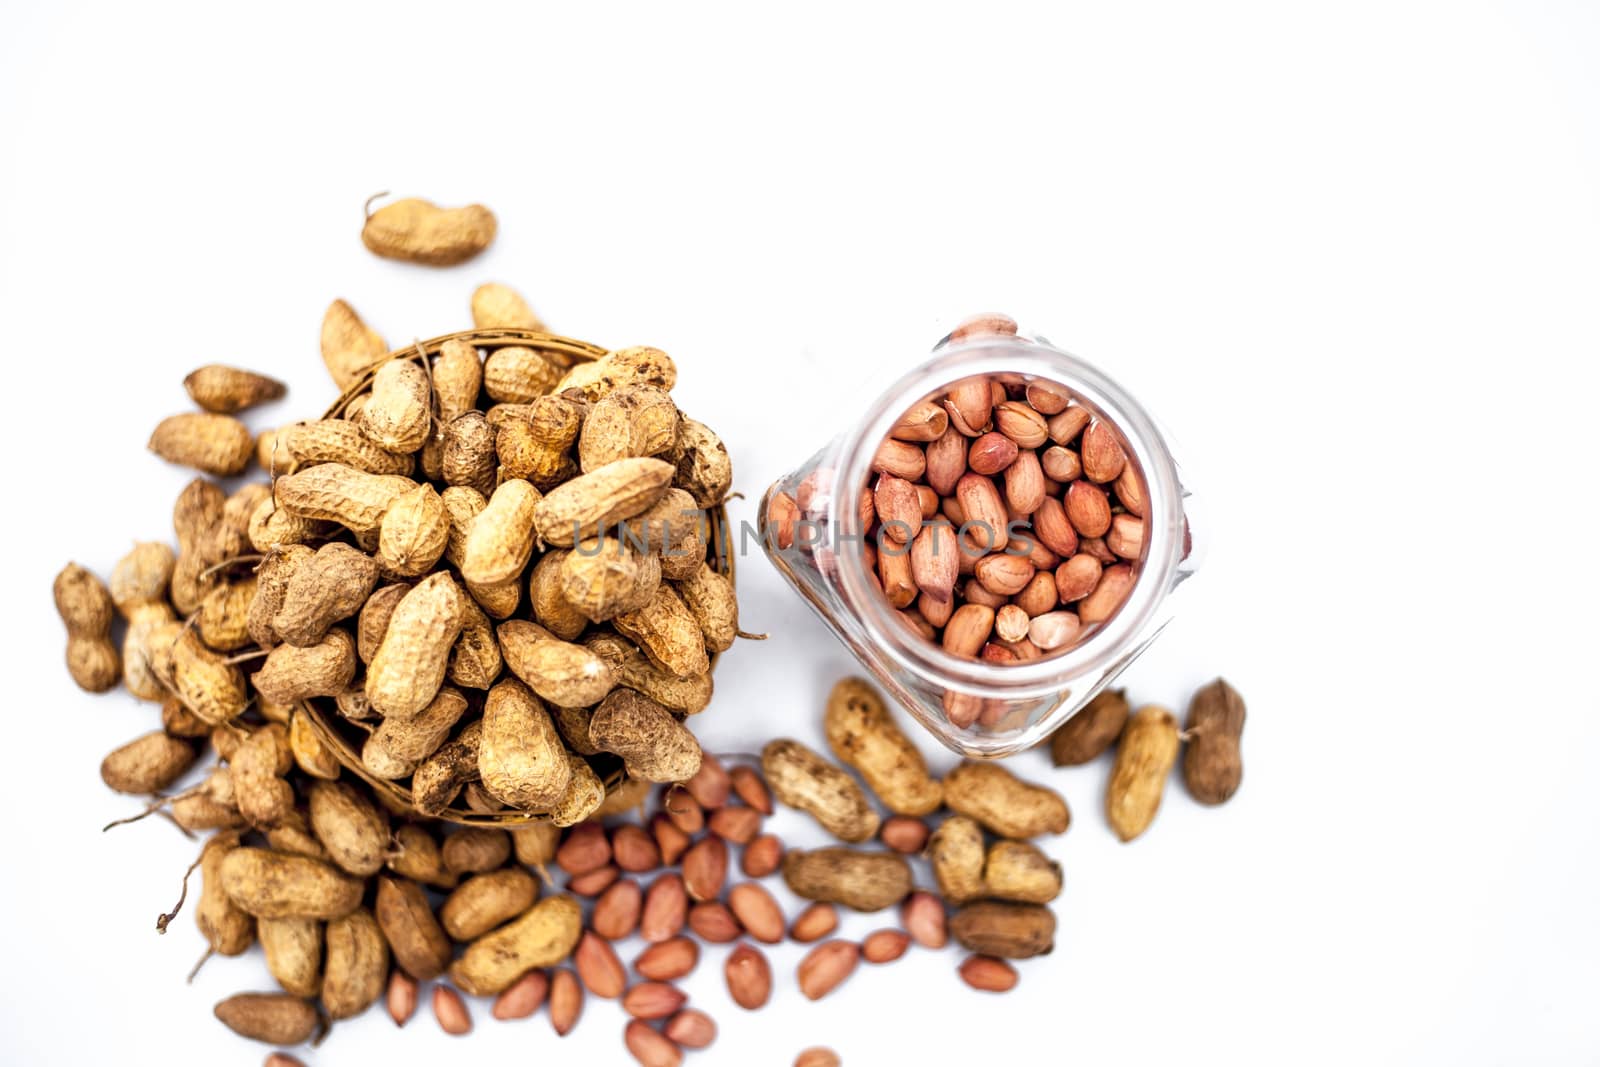 Close up of raw peanuts or groundnut isolated on white with some peeled in a separate bottle.